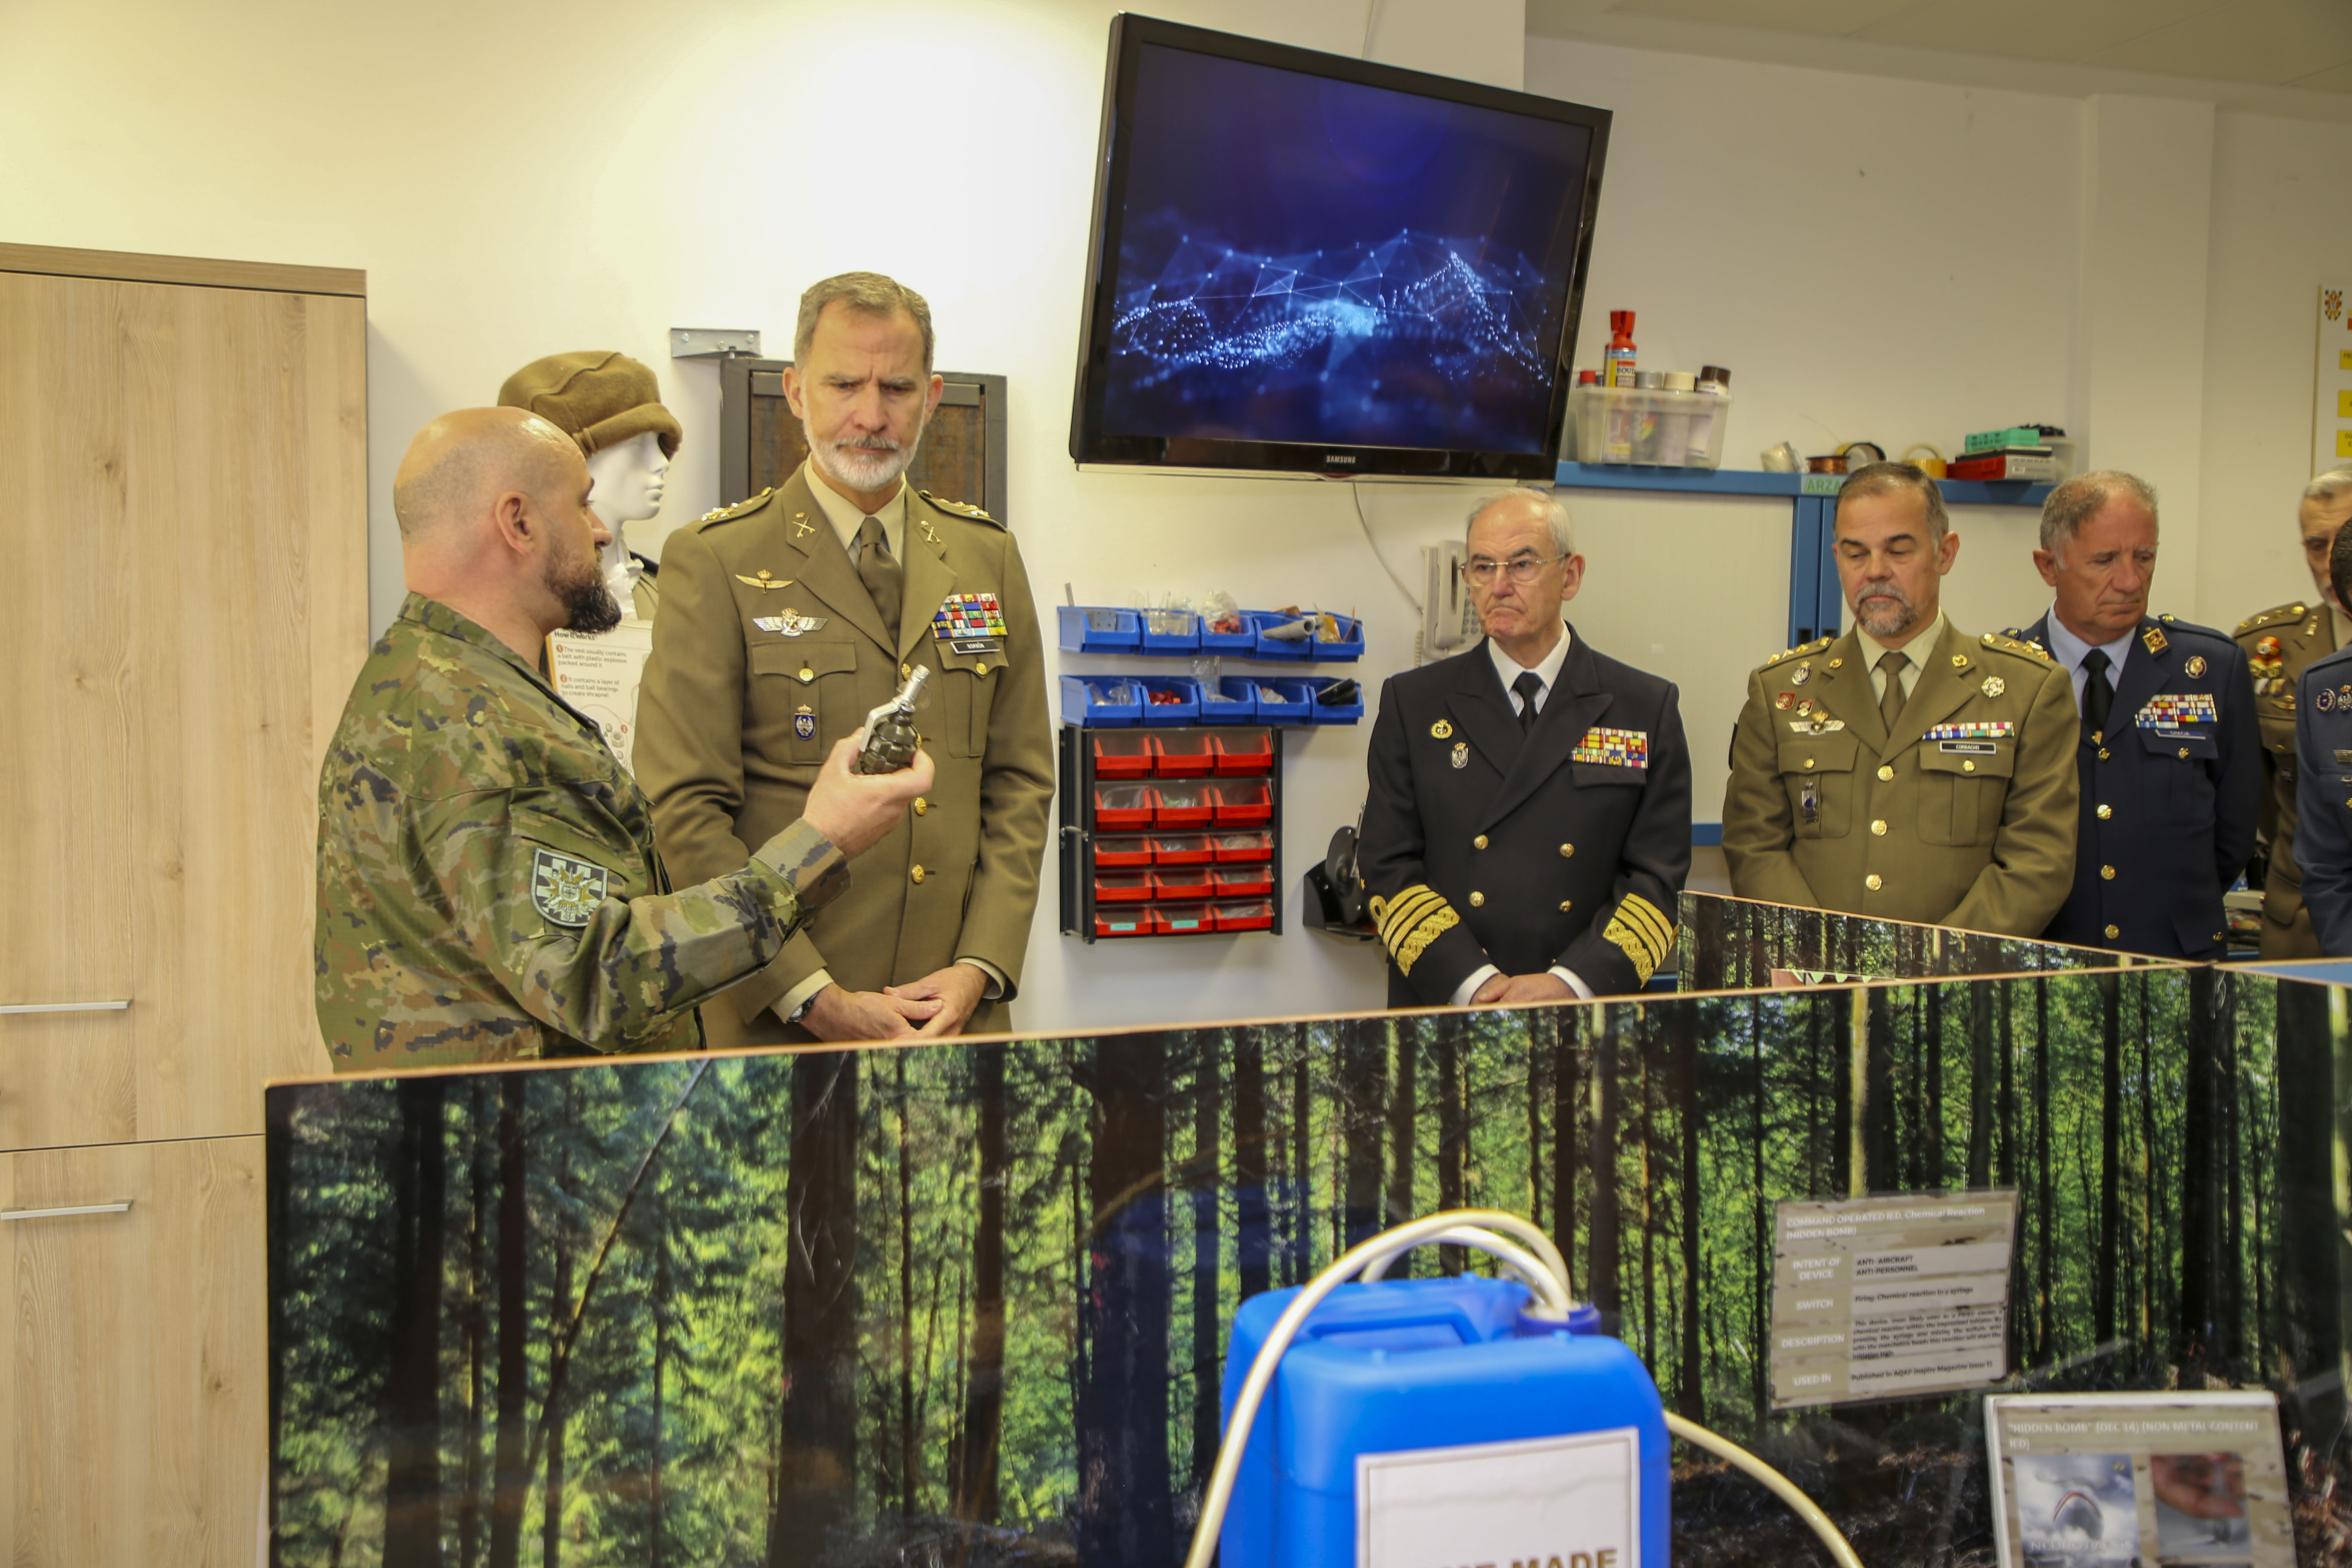 HIS MAJESTY KING FELIPE VI VISITS THE CENTRE OF EXCELLENCE AGAINST IMPROVISED EXPLOSIVE DEVICES (C-IED COE)